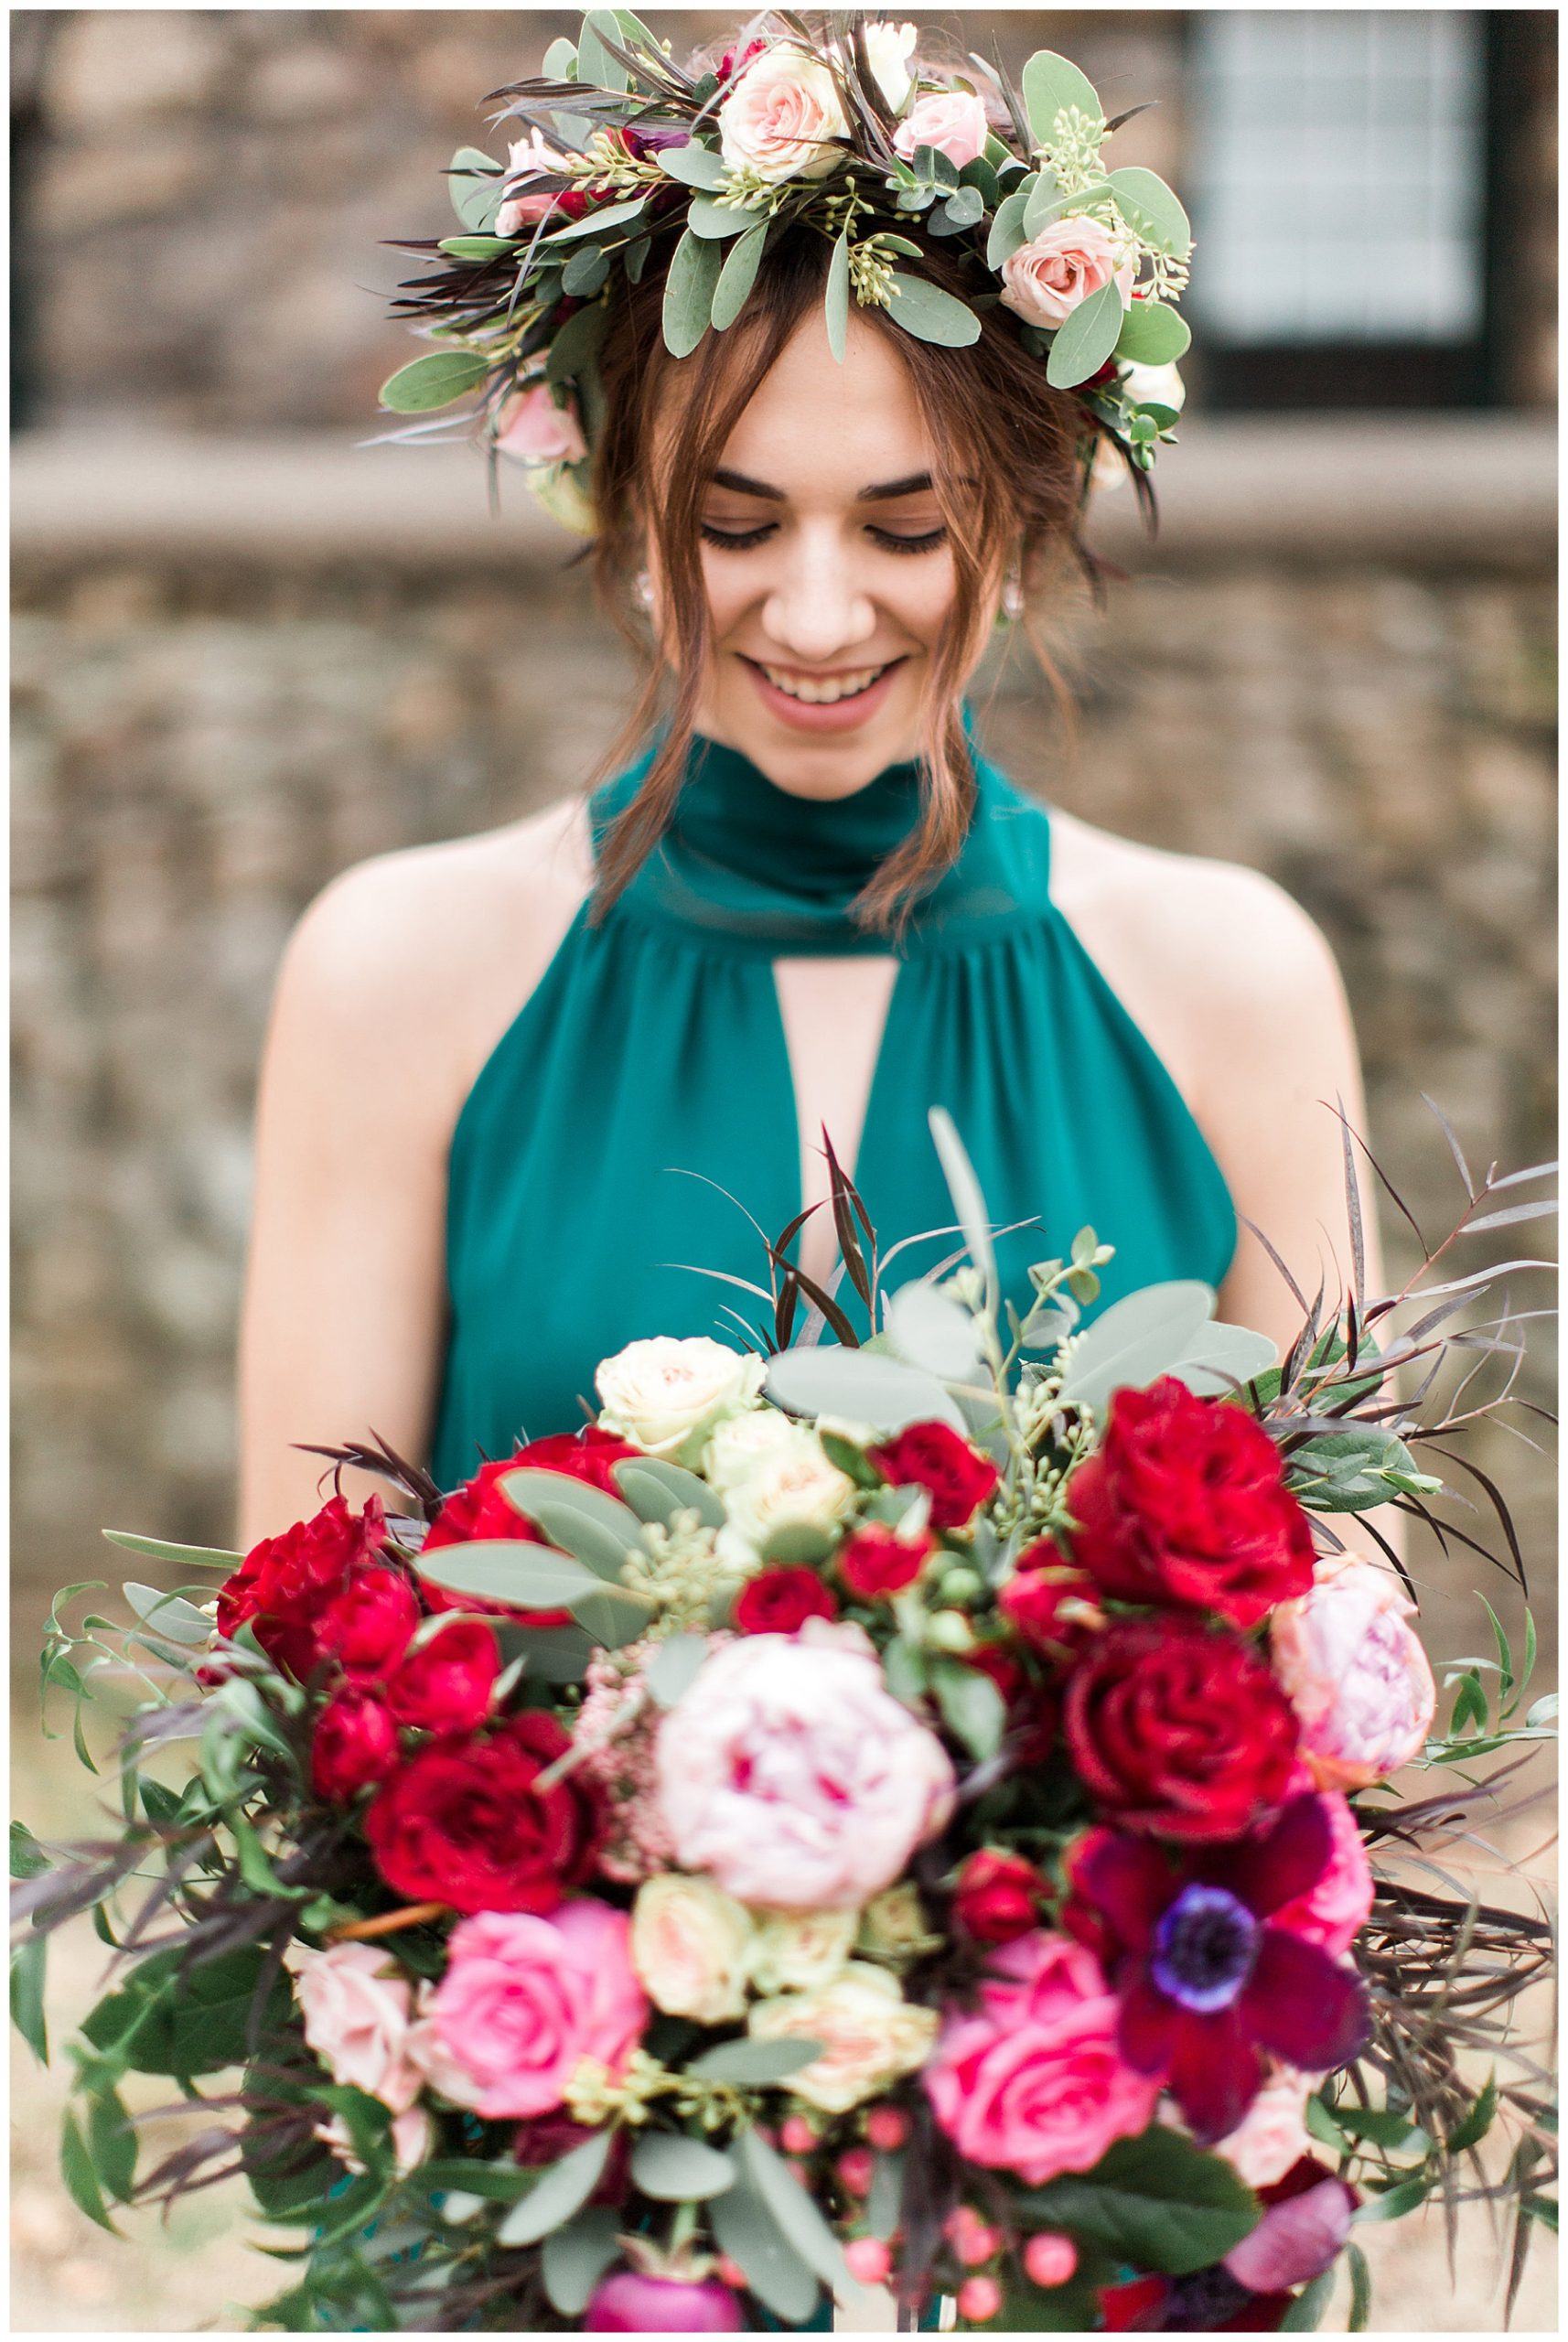 Bridal_Portrait_Wedding_Bouquet_Floral_Crown_Kristina_Staal_Photography_Waveny_House_New_Canaan_Connecticut.jpg